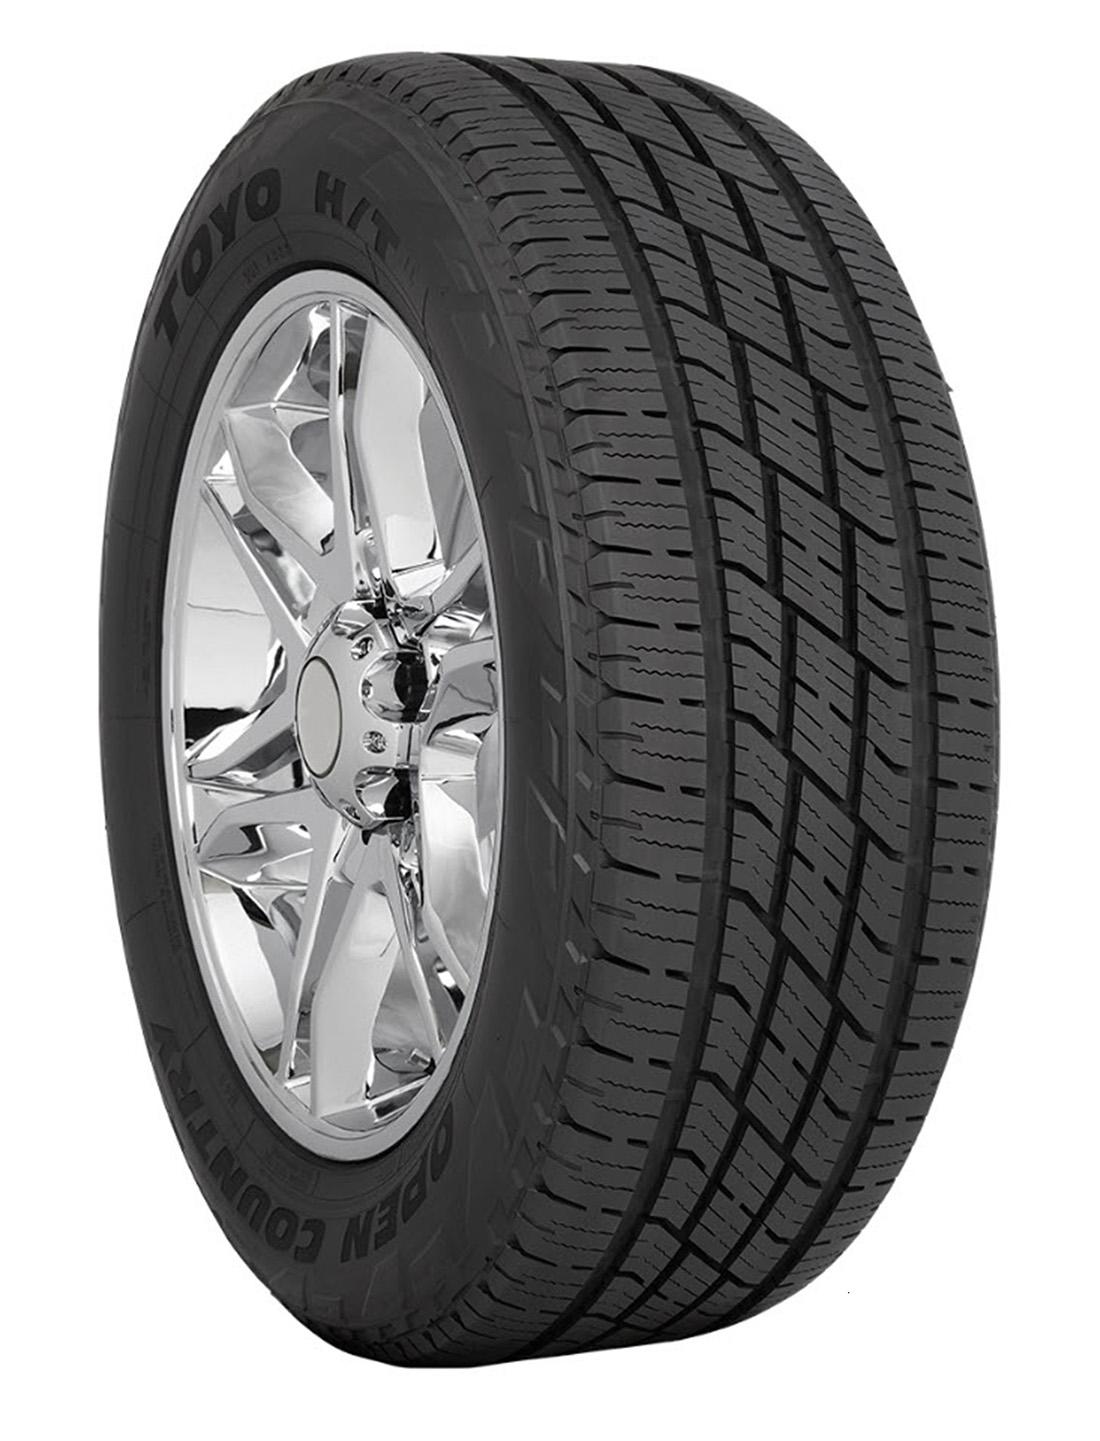 Toyo - PROXES HT  NW  305/50R20